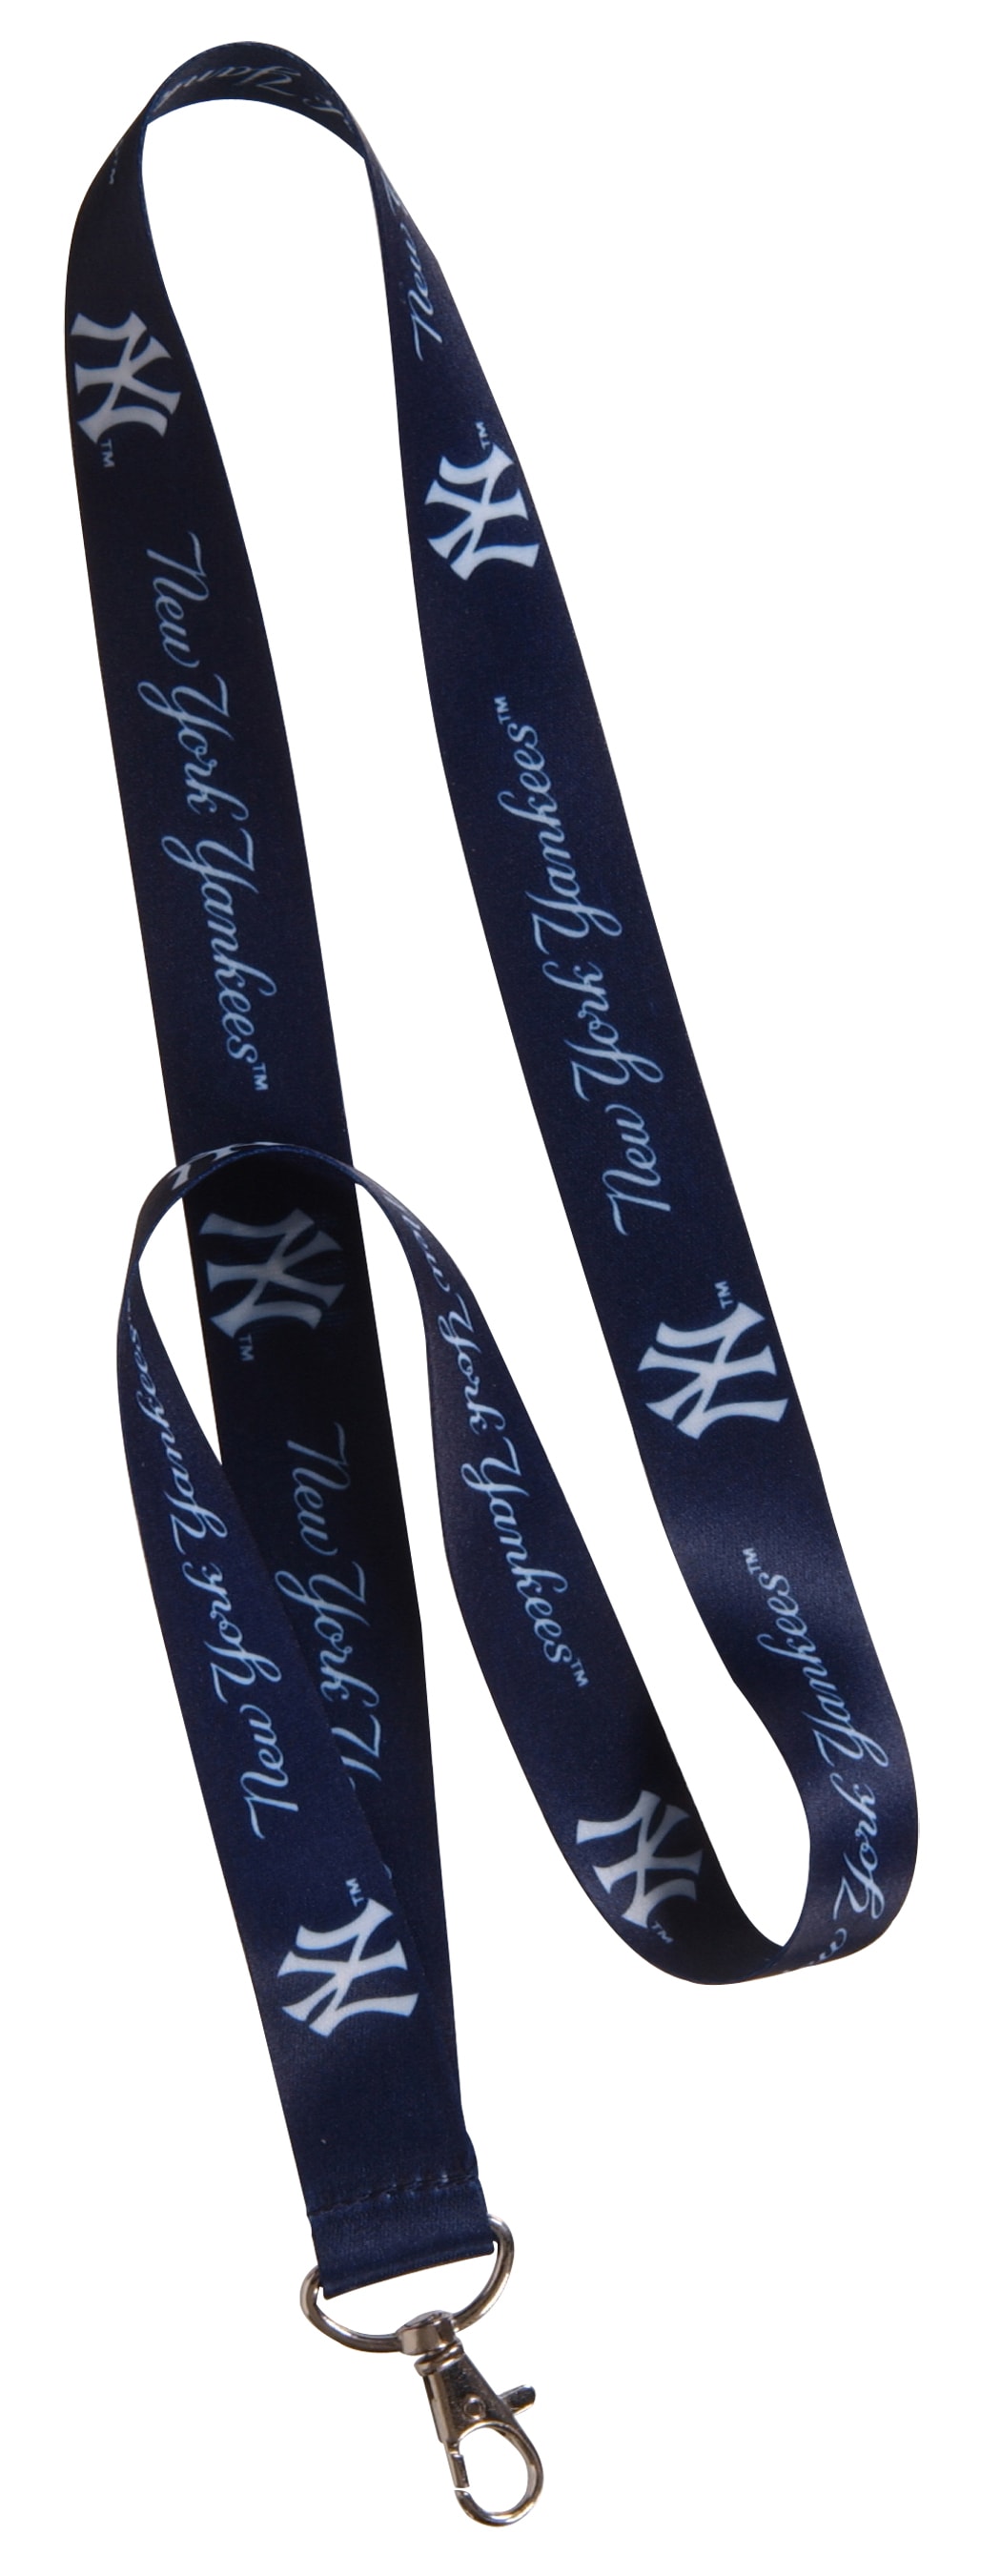  MLB Los Angeles Dodgers Two Tone Lanyard, Navy/White, One Size  : Sports Related Key Chains : Sports & Outdoors